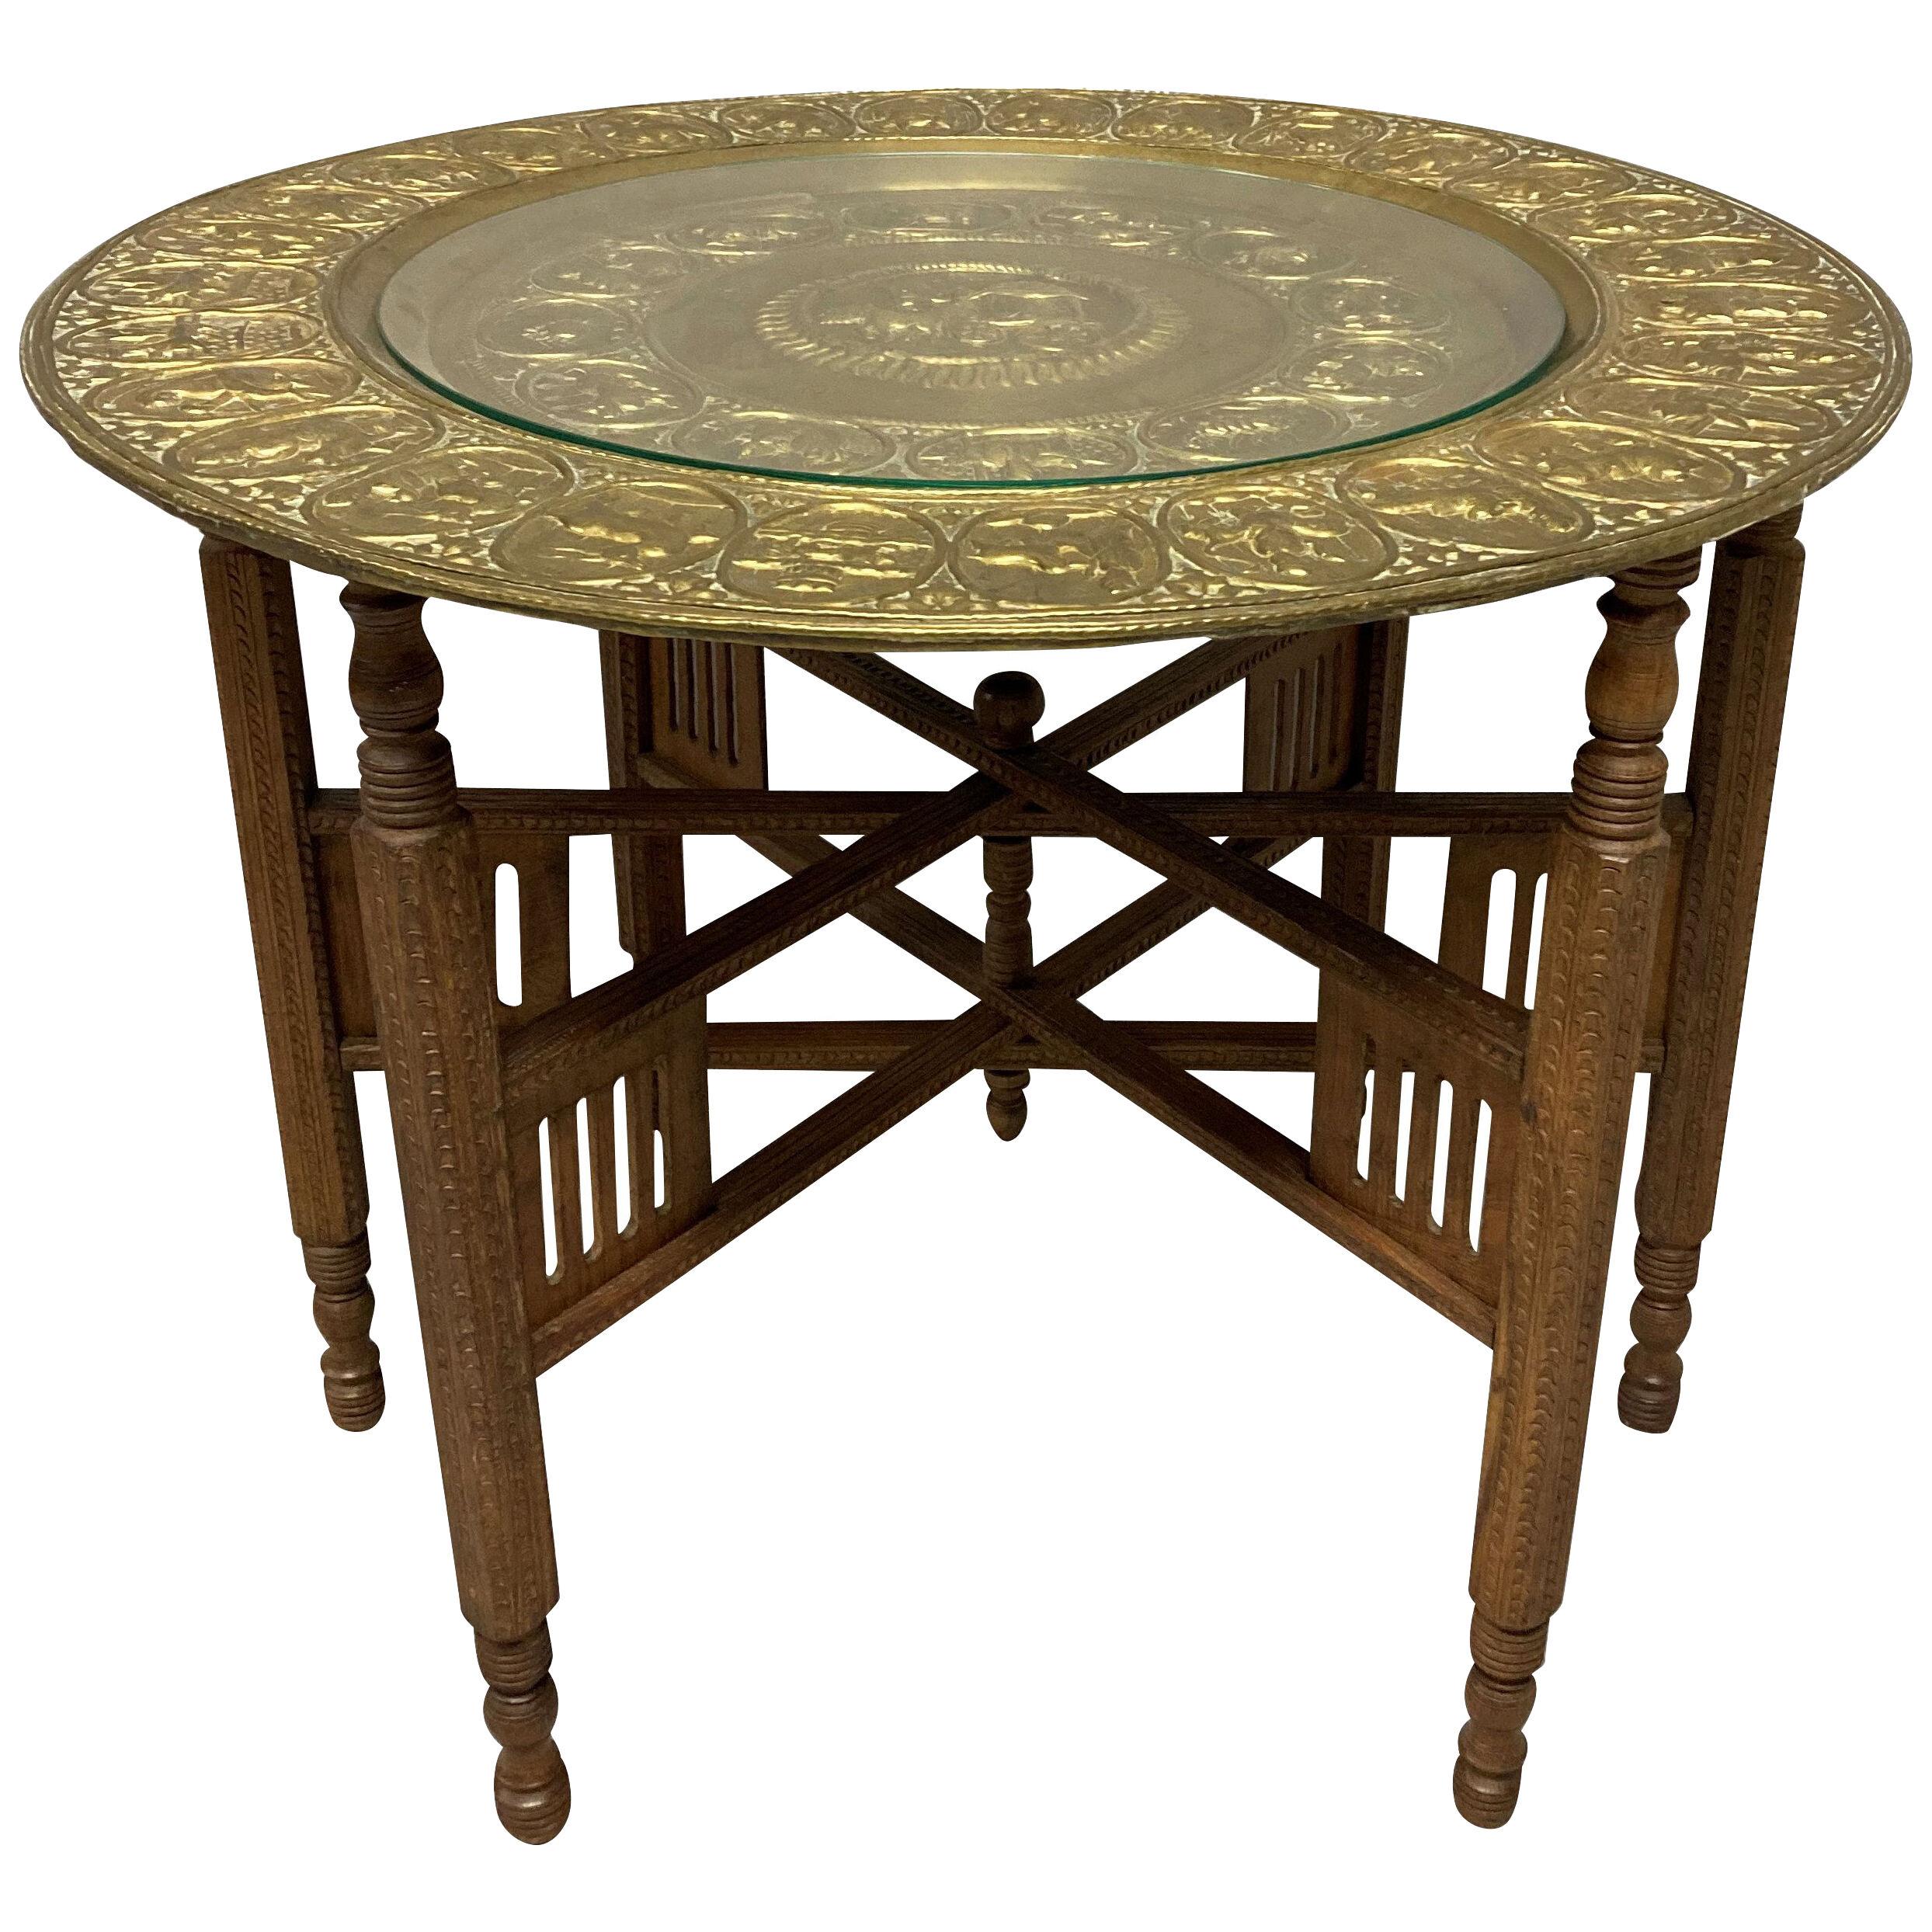 AN INDIAN BRASS FOLDING OCCASIONAL TABLE